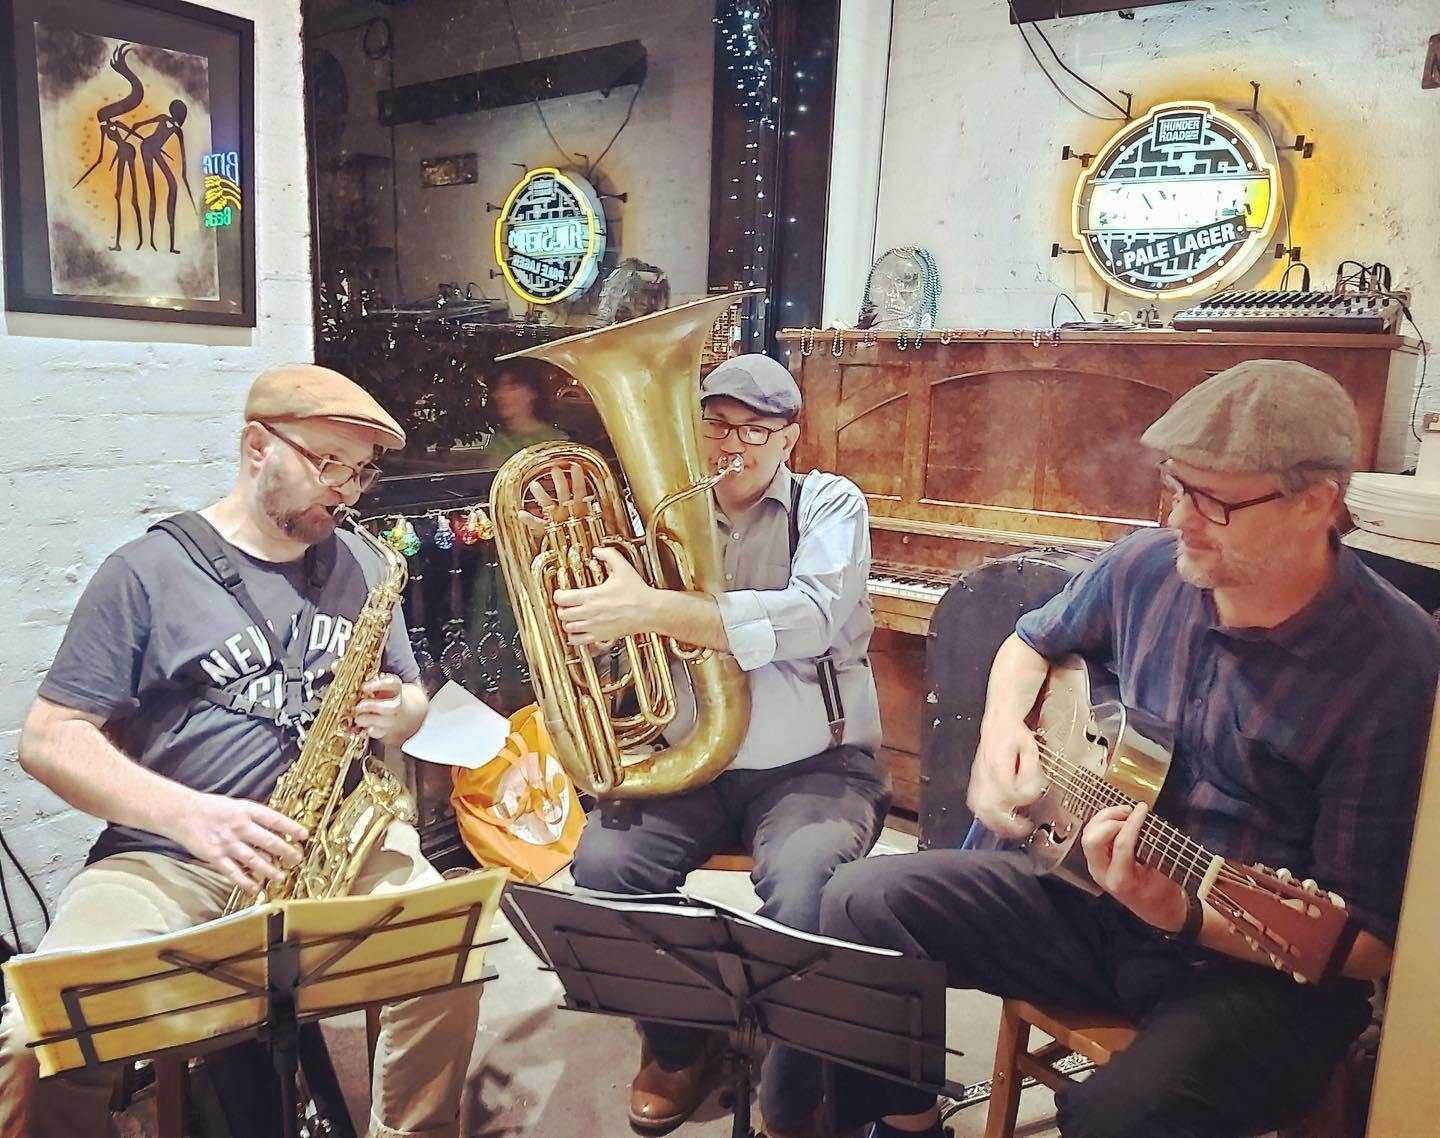 Three men playing music in a room with a bar.